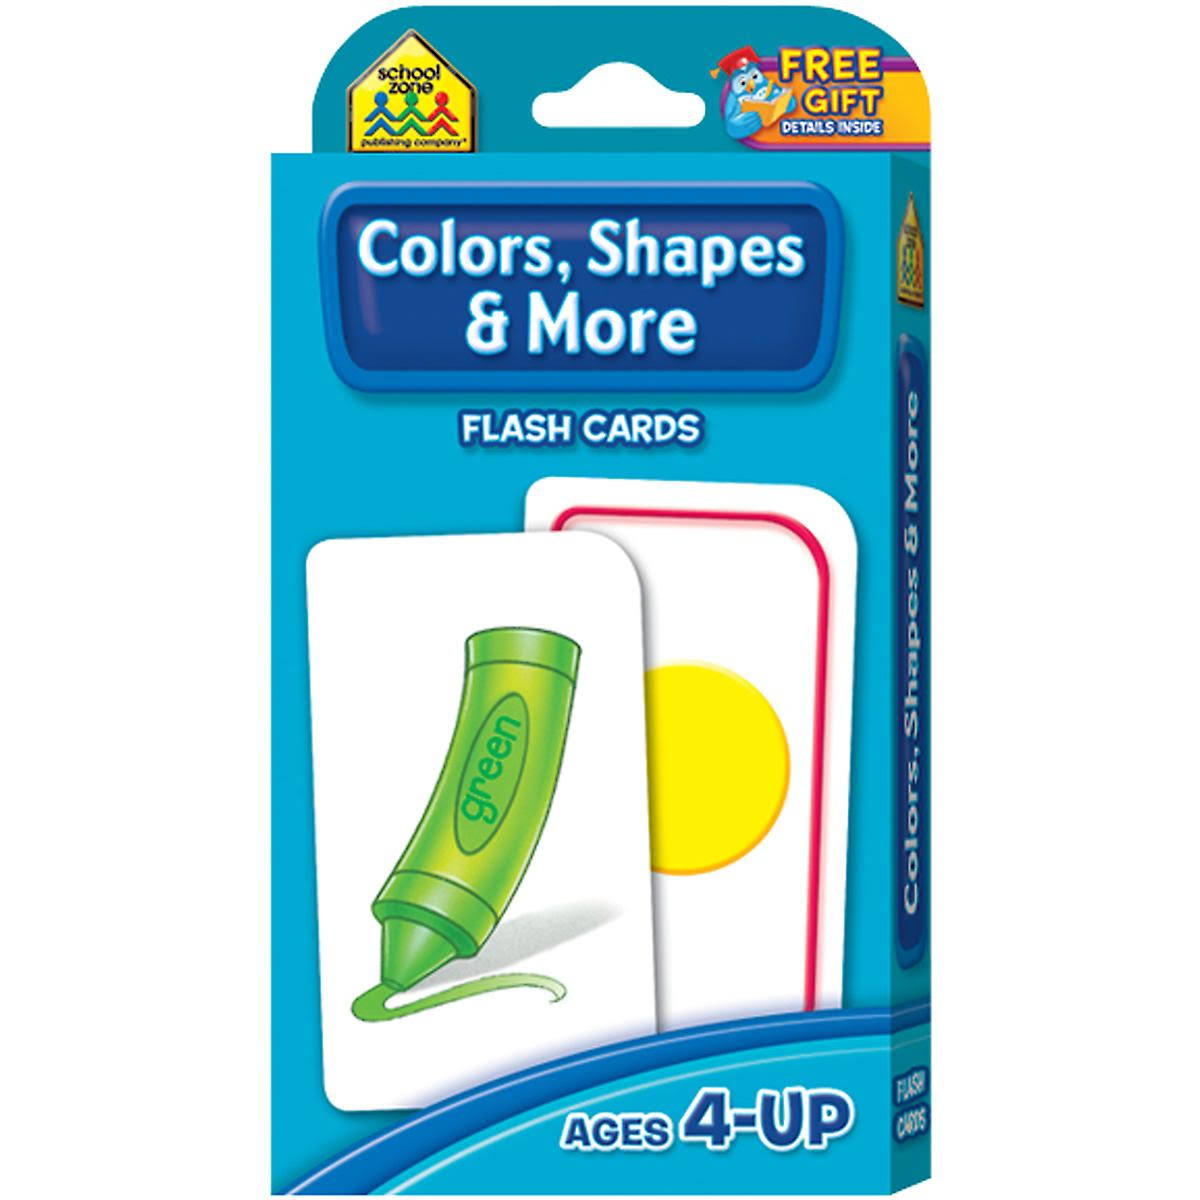 School Zone Colors, Shapes & More Flash Cards